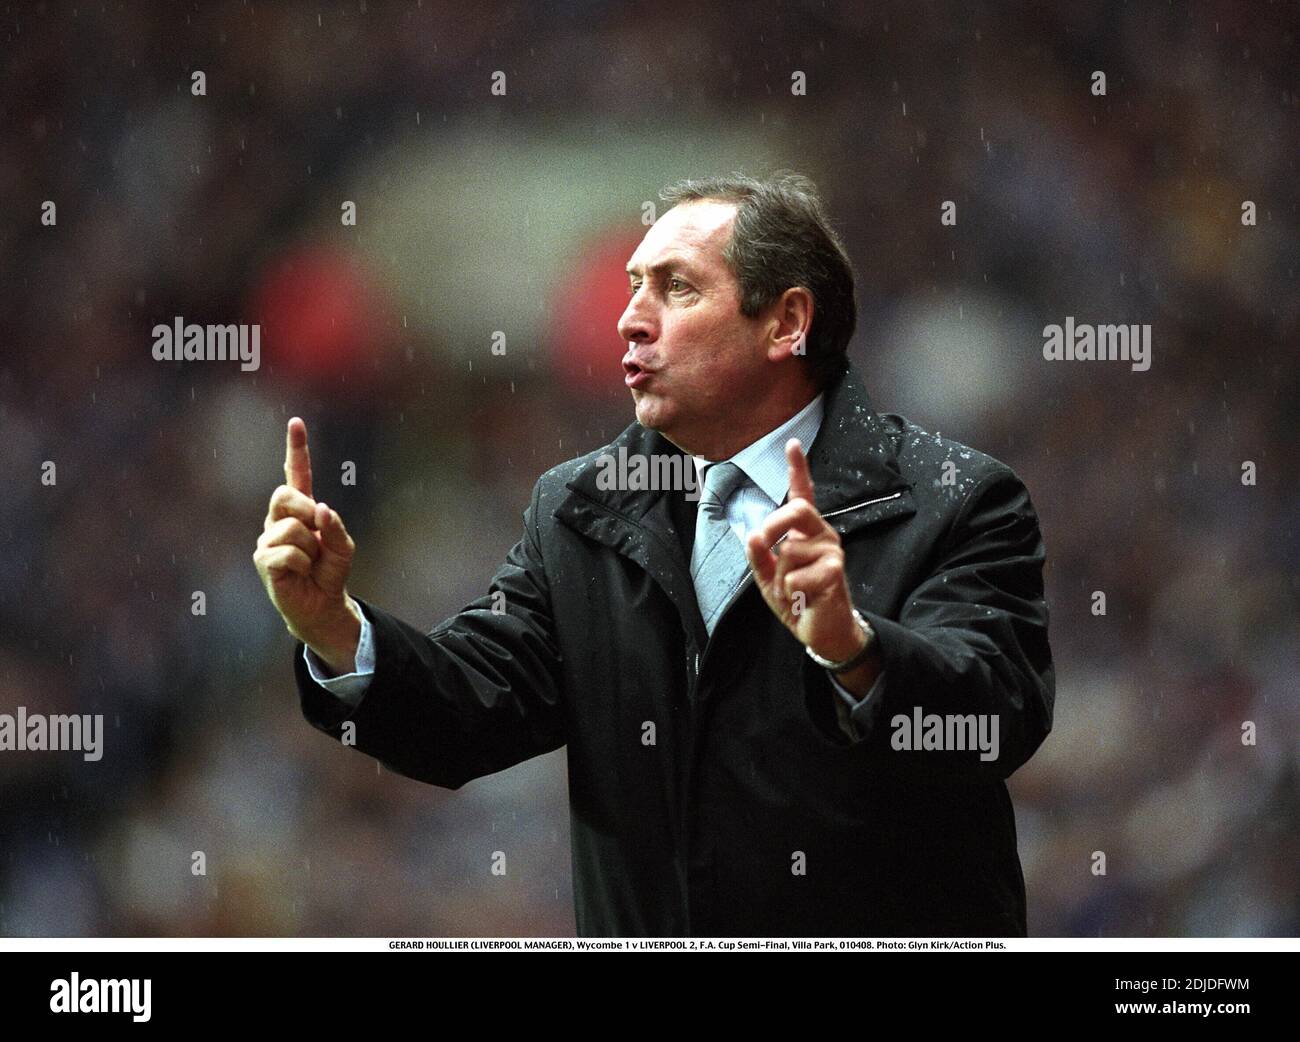 GERARD HOULLIER (LIVERPOOL MANAGER), Wycombe 1 v LIVERPOOL 2, F.A. Cup Semi-Final, Villa Park, 010408. Photo: Glyn Kirk/Action Plus.2001.soccer.association football.mangers.coach coaches.premier league premiership.club clubs Stock Photo